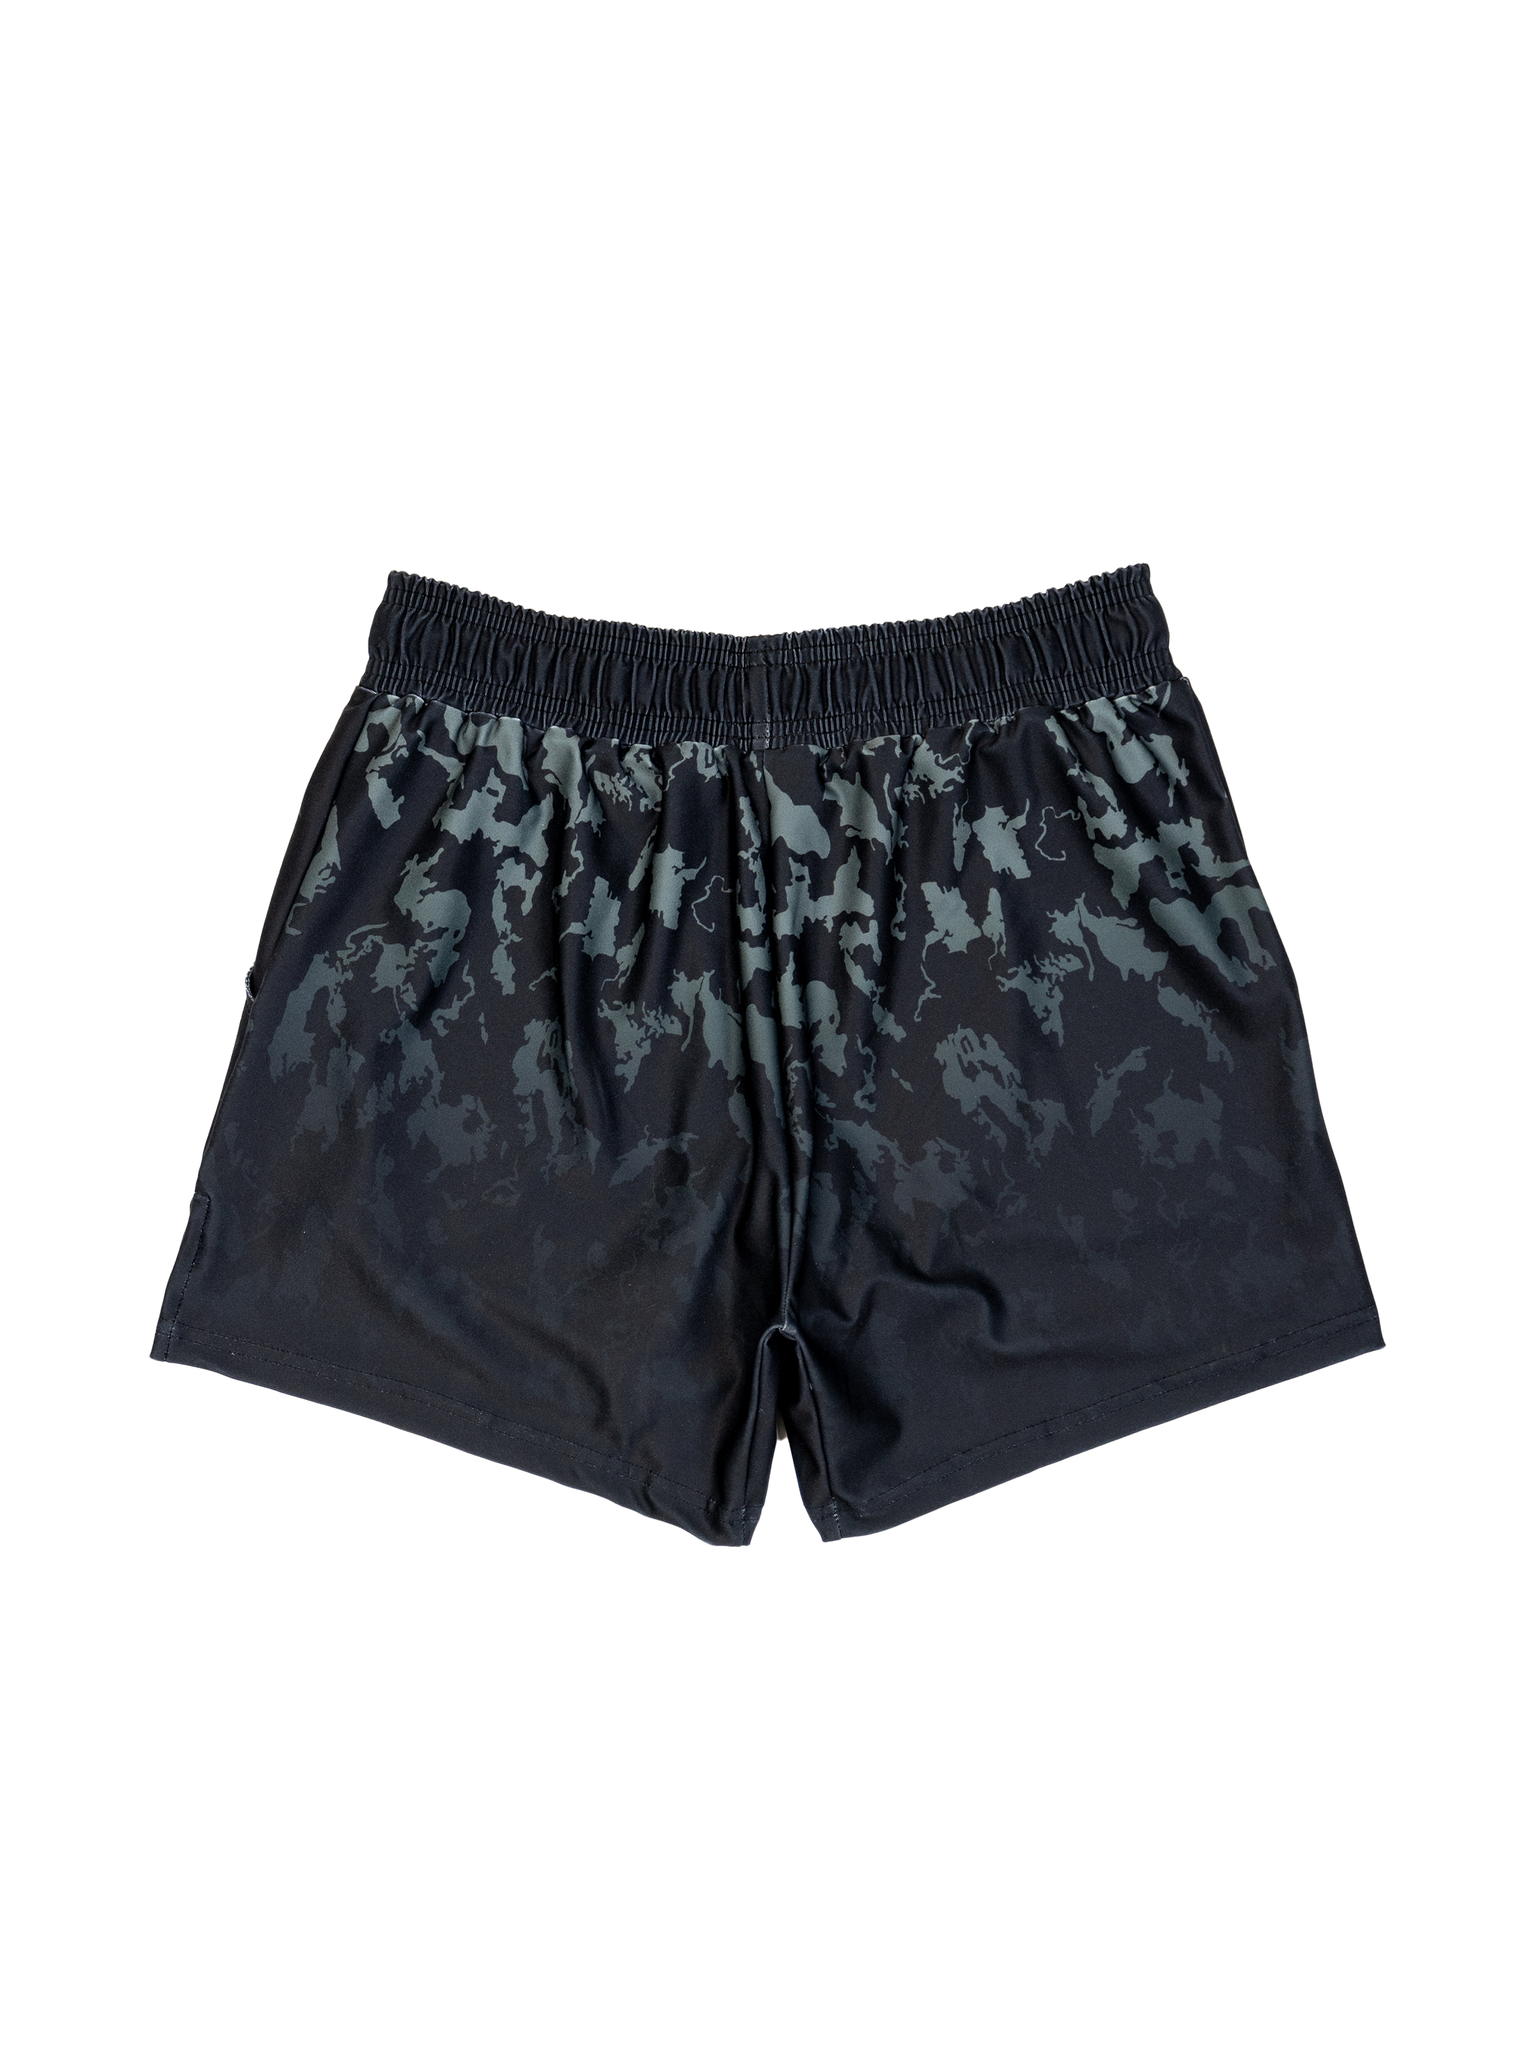 Particle Camo Women's Gym Shorts - Onyx (3" Inseam)